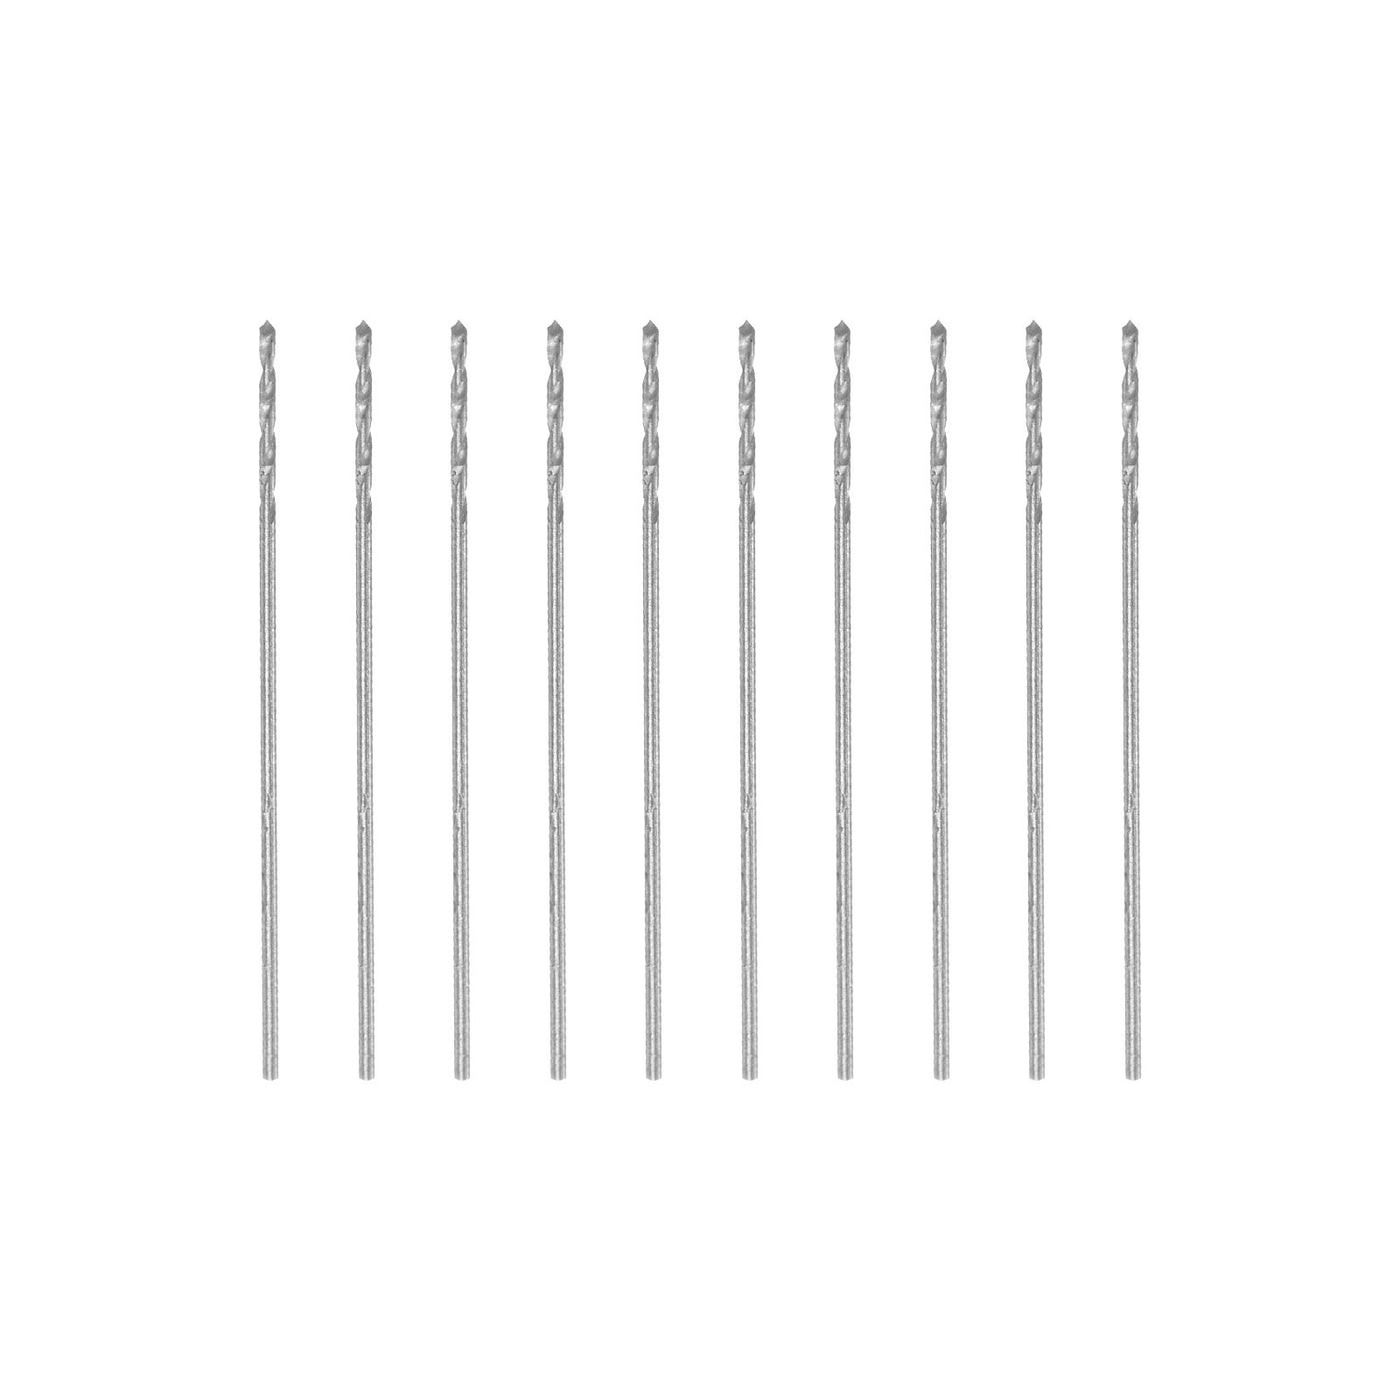 uxcell Uxcell 10 Pcs 0.5mm High Speed Steel Drill Bits, Fully Ground 22mm Length Drill Bit